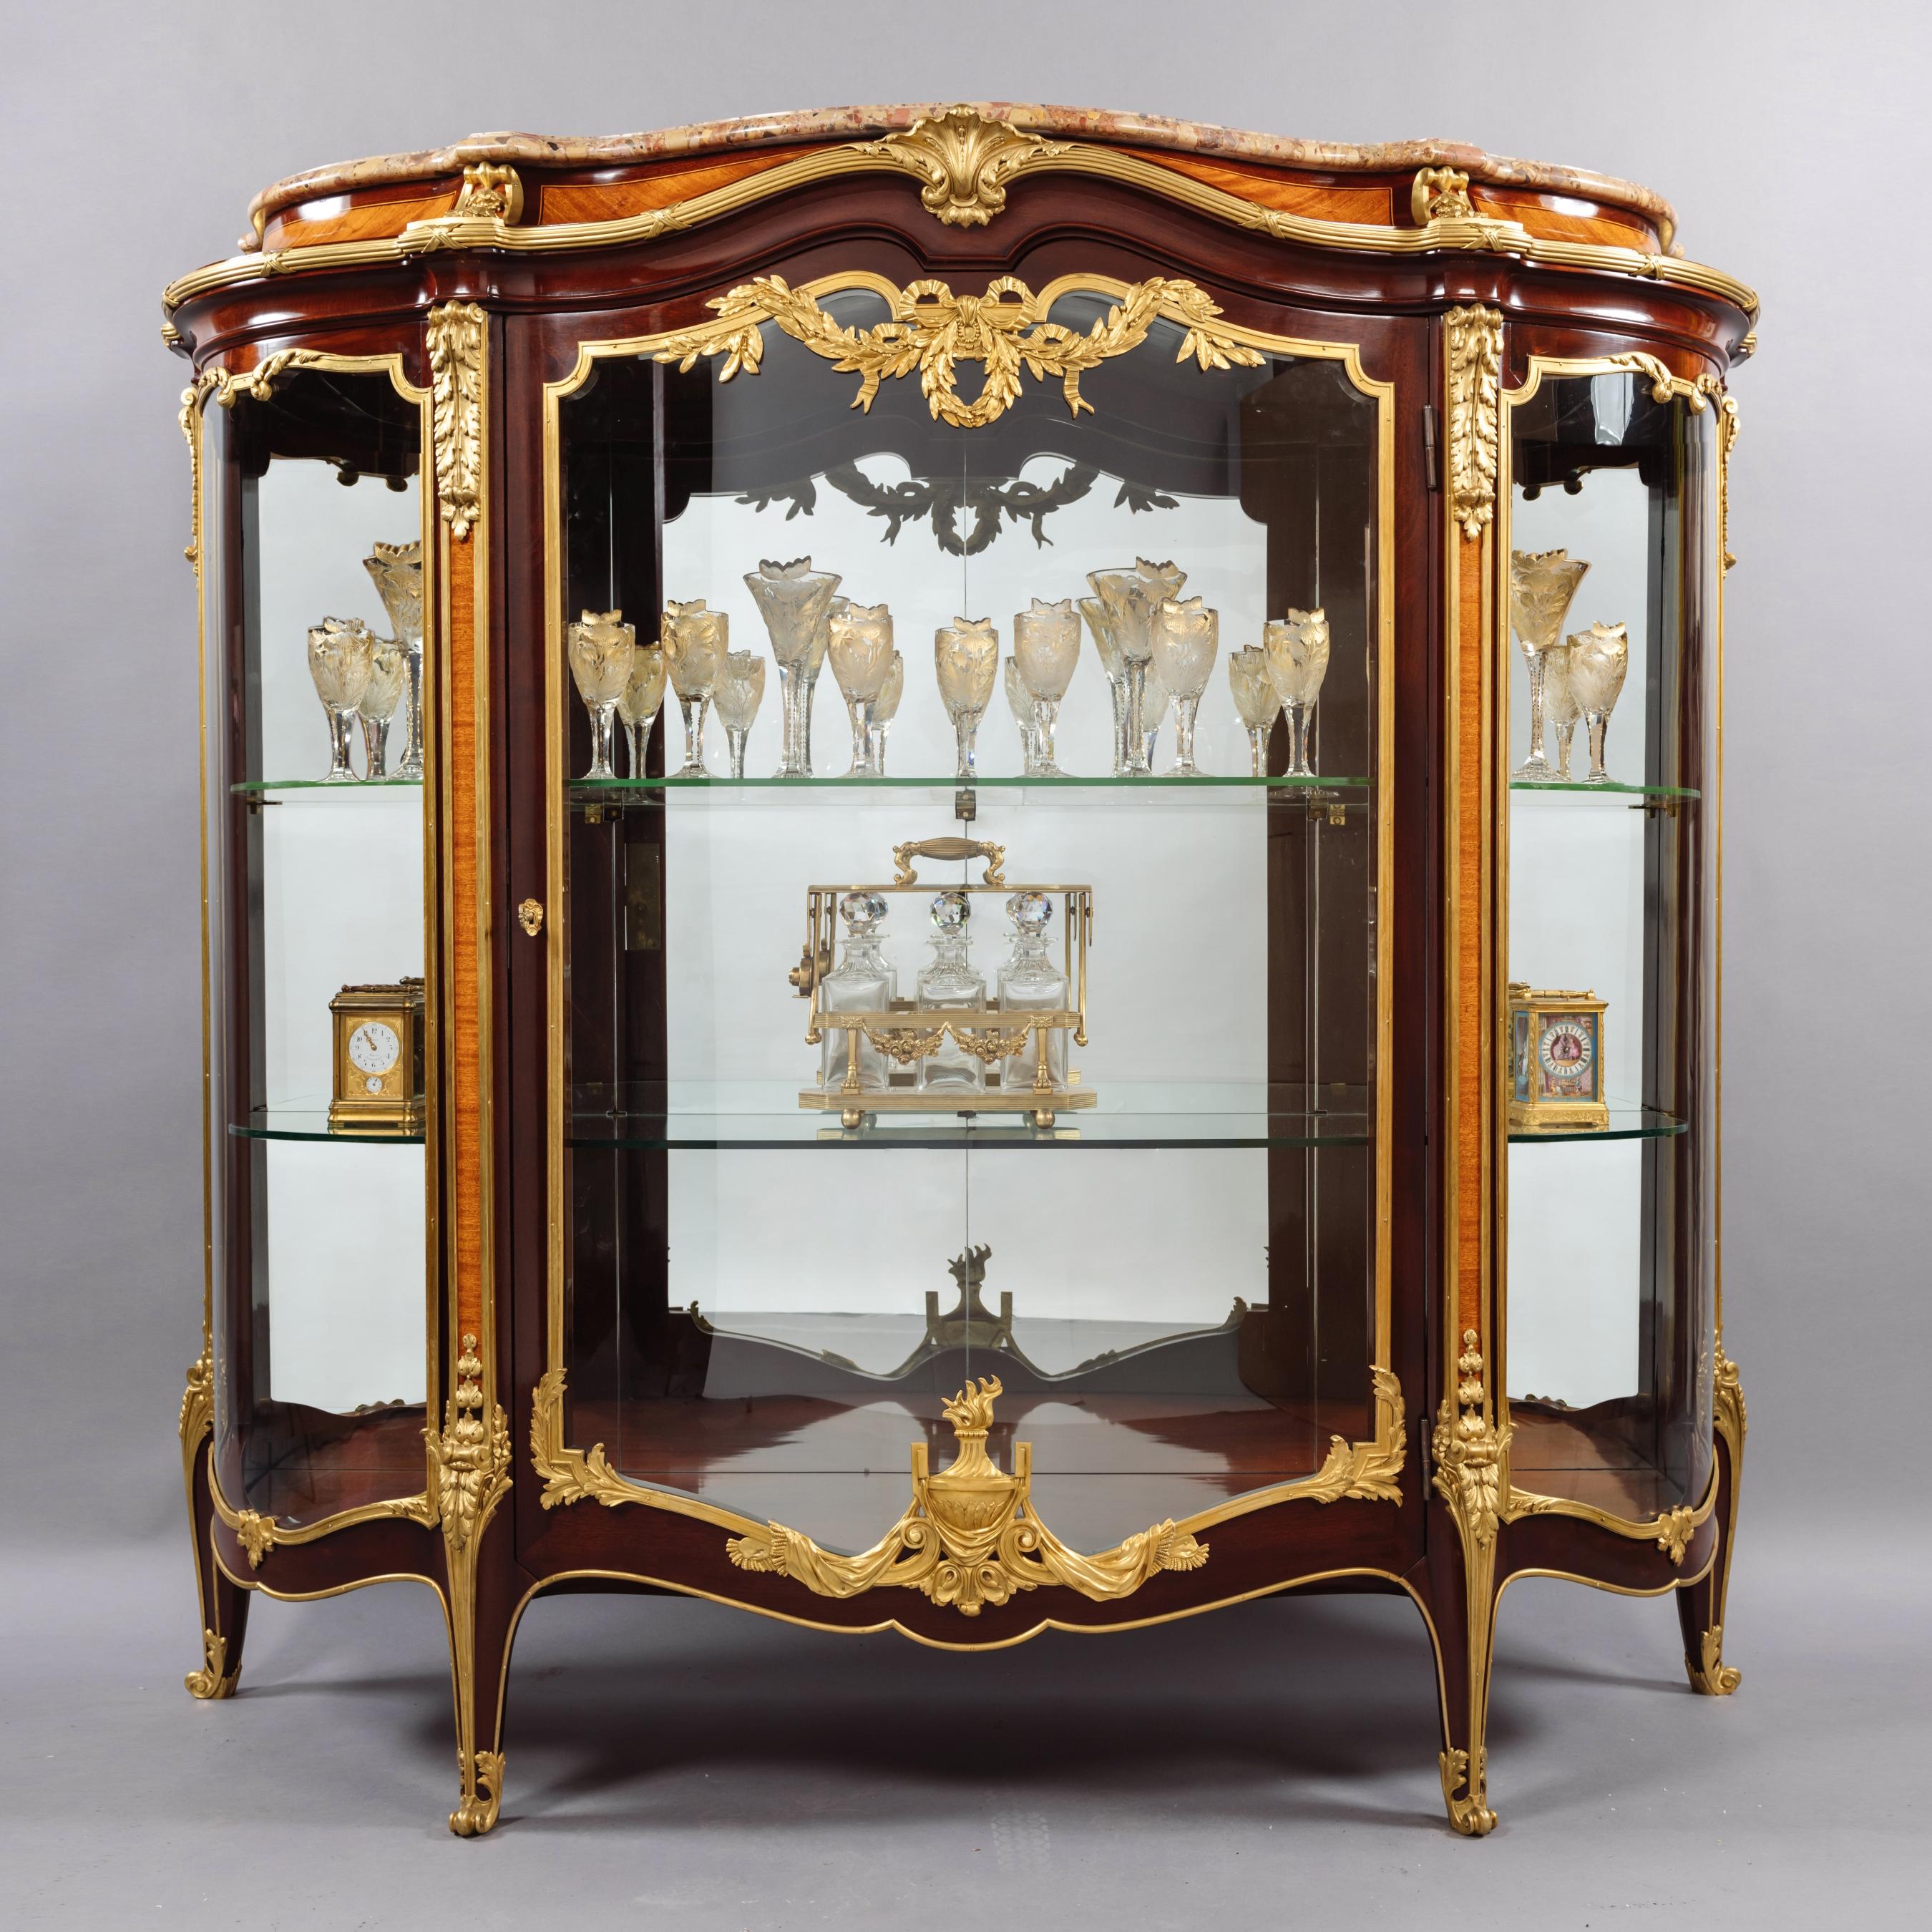 A fine Louis XV style gilt-bronze mounted mahogany bombé vitrine by François Linke.

Signed to the corner clasp 'F. Linke'.

This elegant bombé shaped vitrine has a shaped brèche d'Alep marble top above a conforming case fitted with a shaped